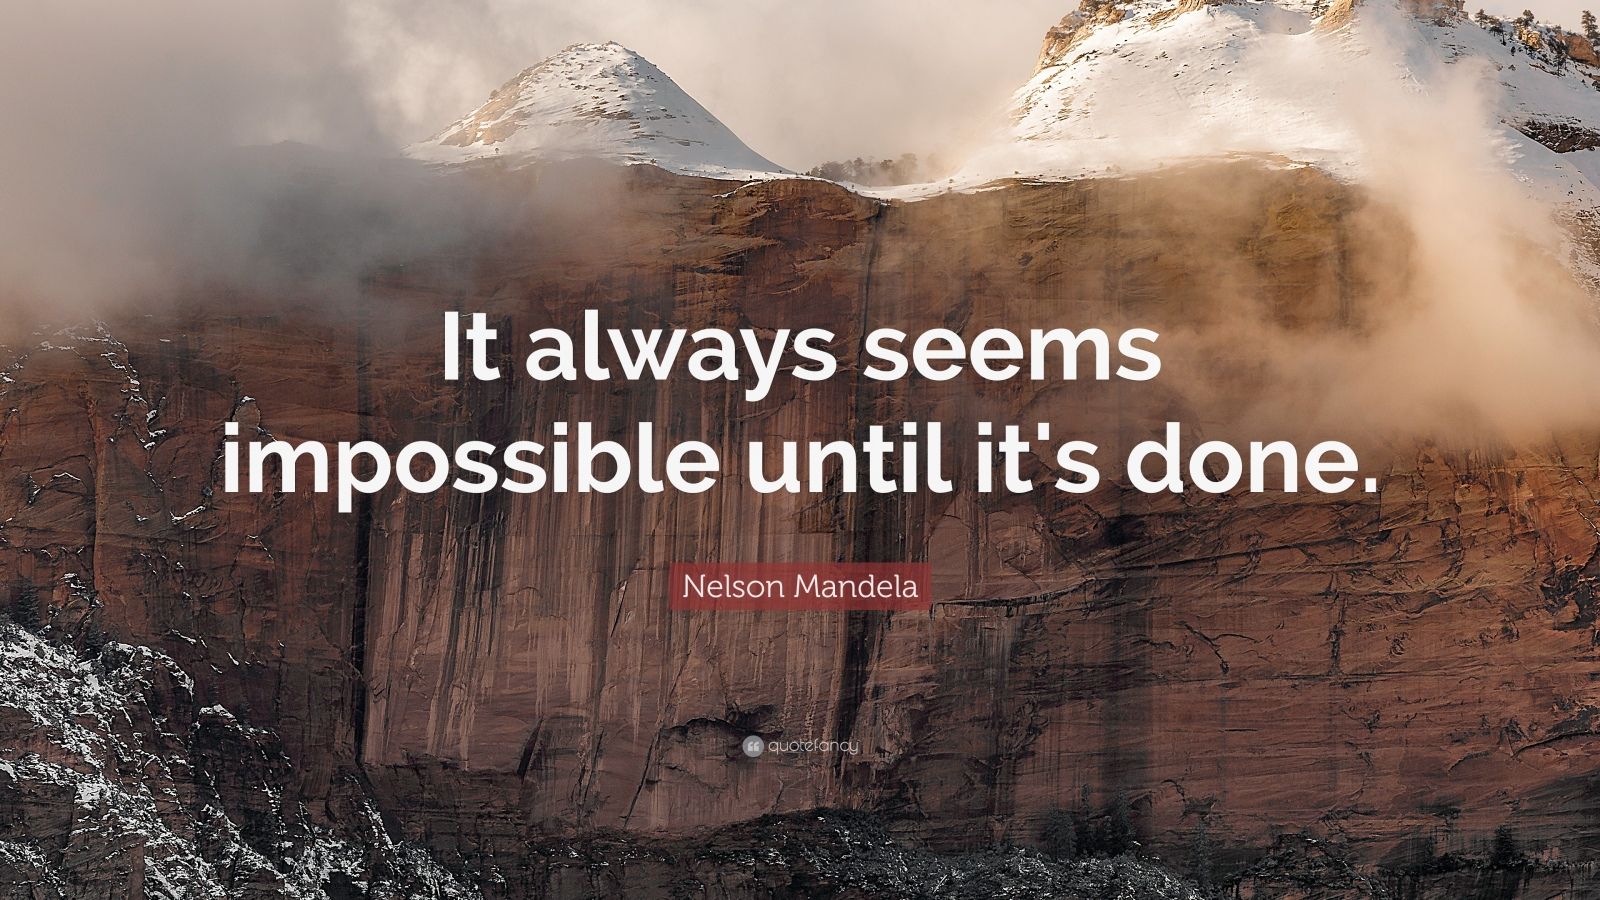 Nelson Mandela Quote: “It always seems impossible until it's done.” (32